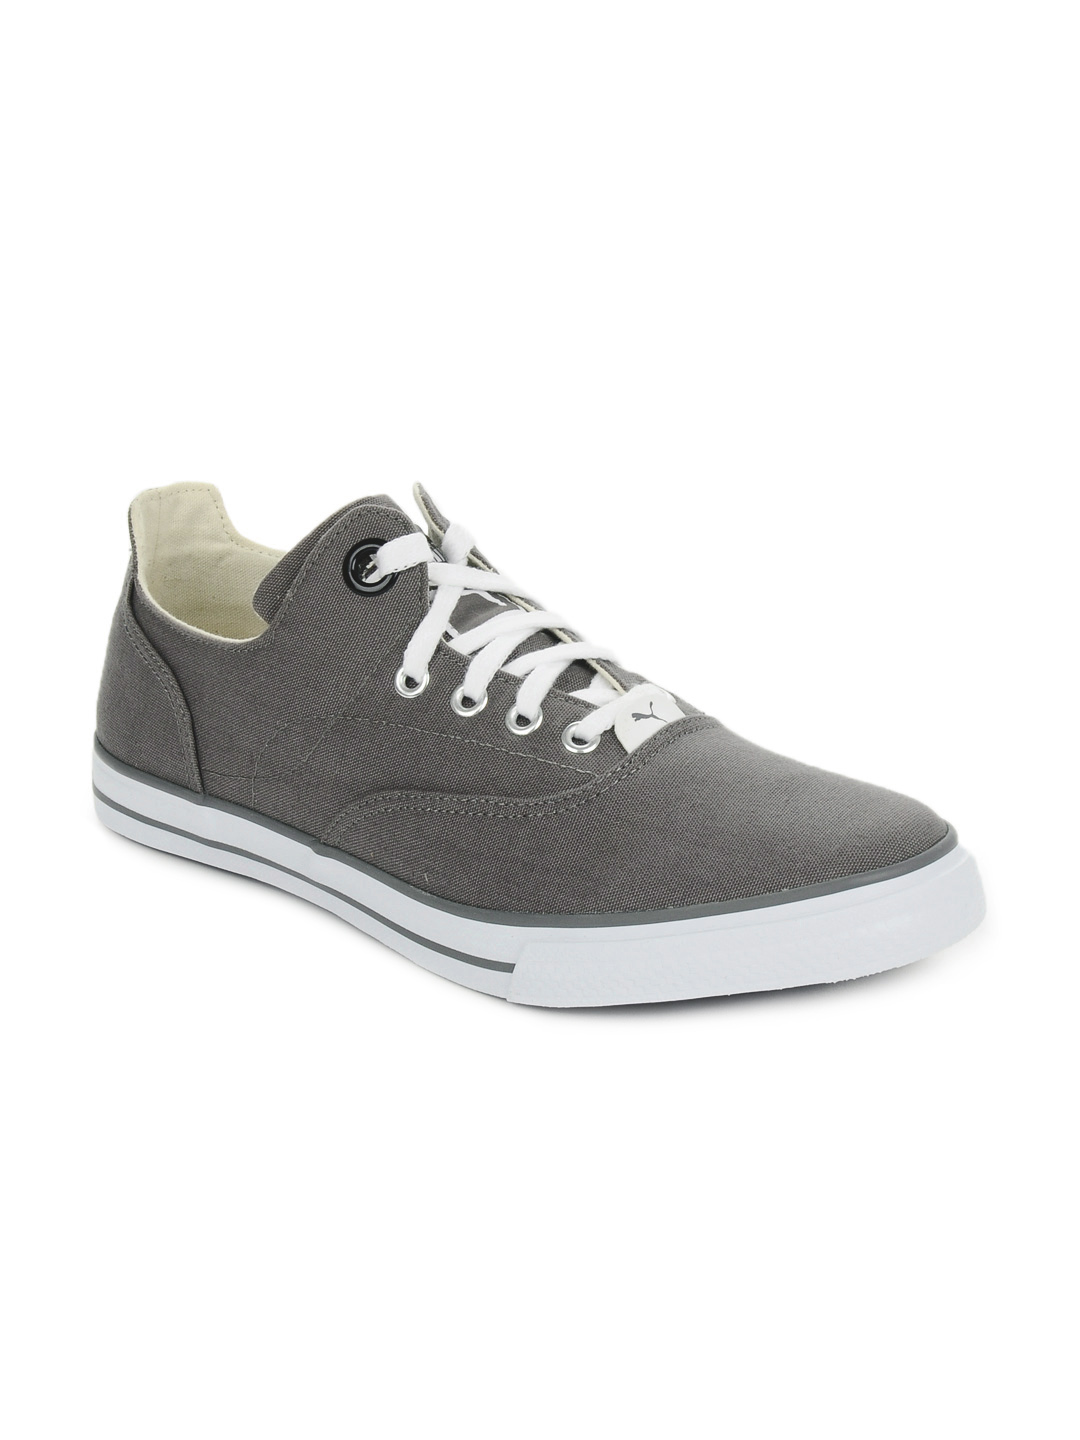 Download this Casual Shoes Aefaaeecfeb Images Mini picture